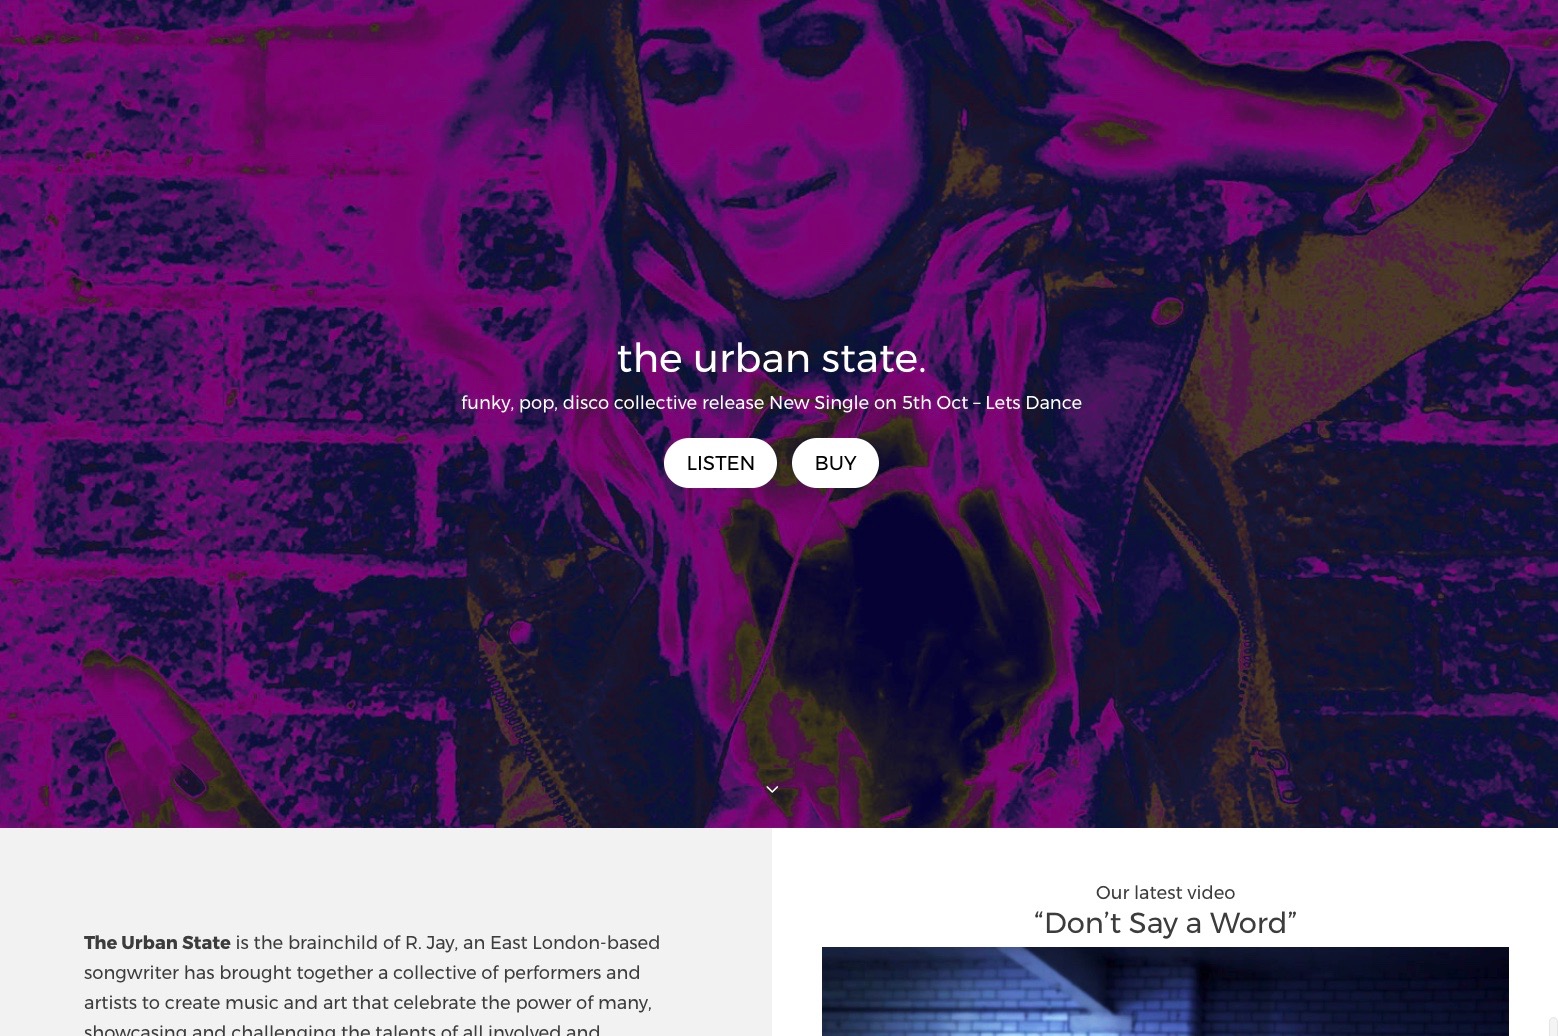 The Urban State